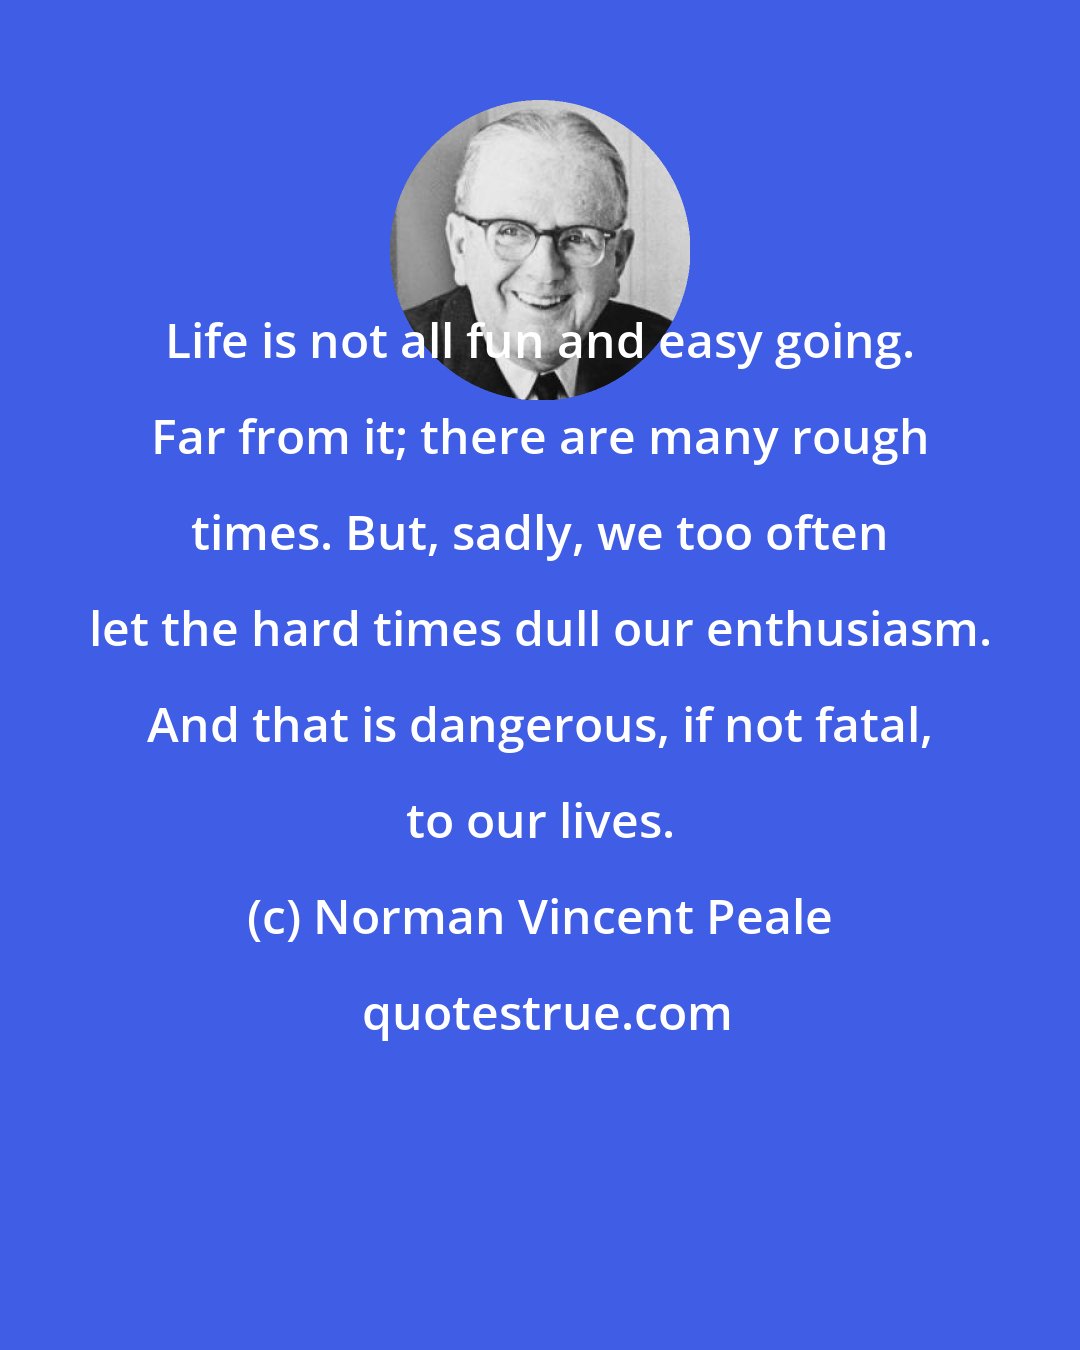 Norman Vincent Peale: Life is not all fun and easy going. Far from it; there are many rough times. But, sadly, we too often let the hard times dull our enthusiasm. And that is dangerous, if not fatal, to our lives.